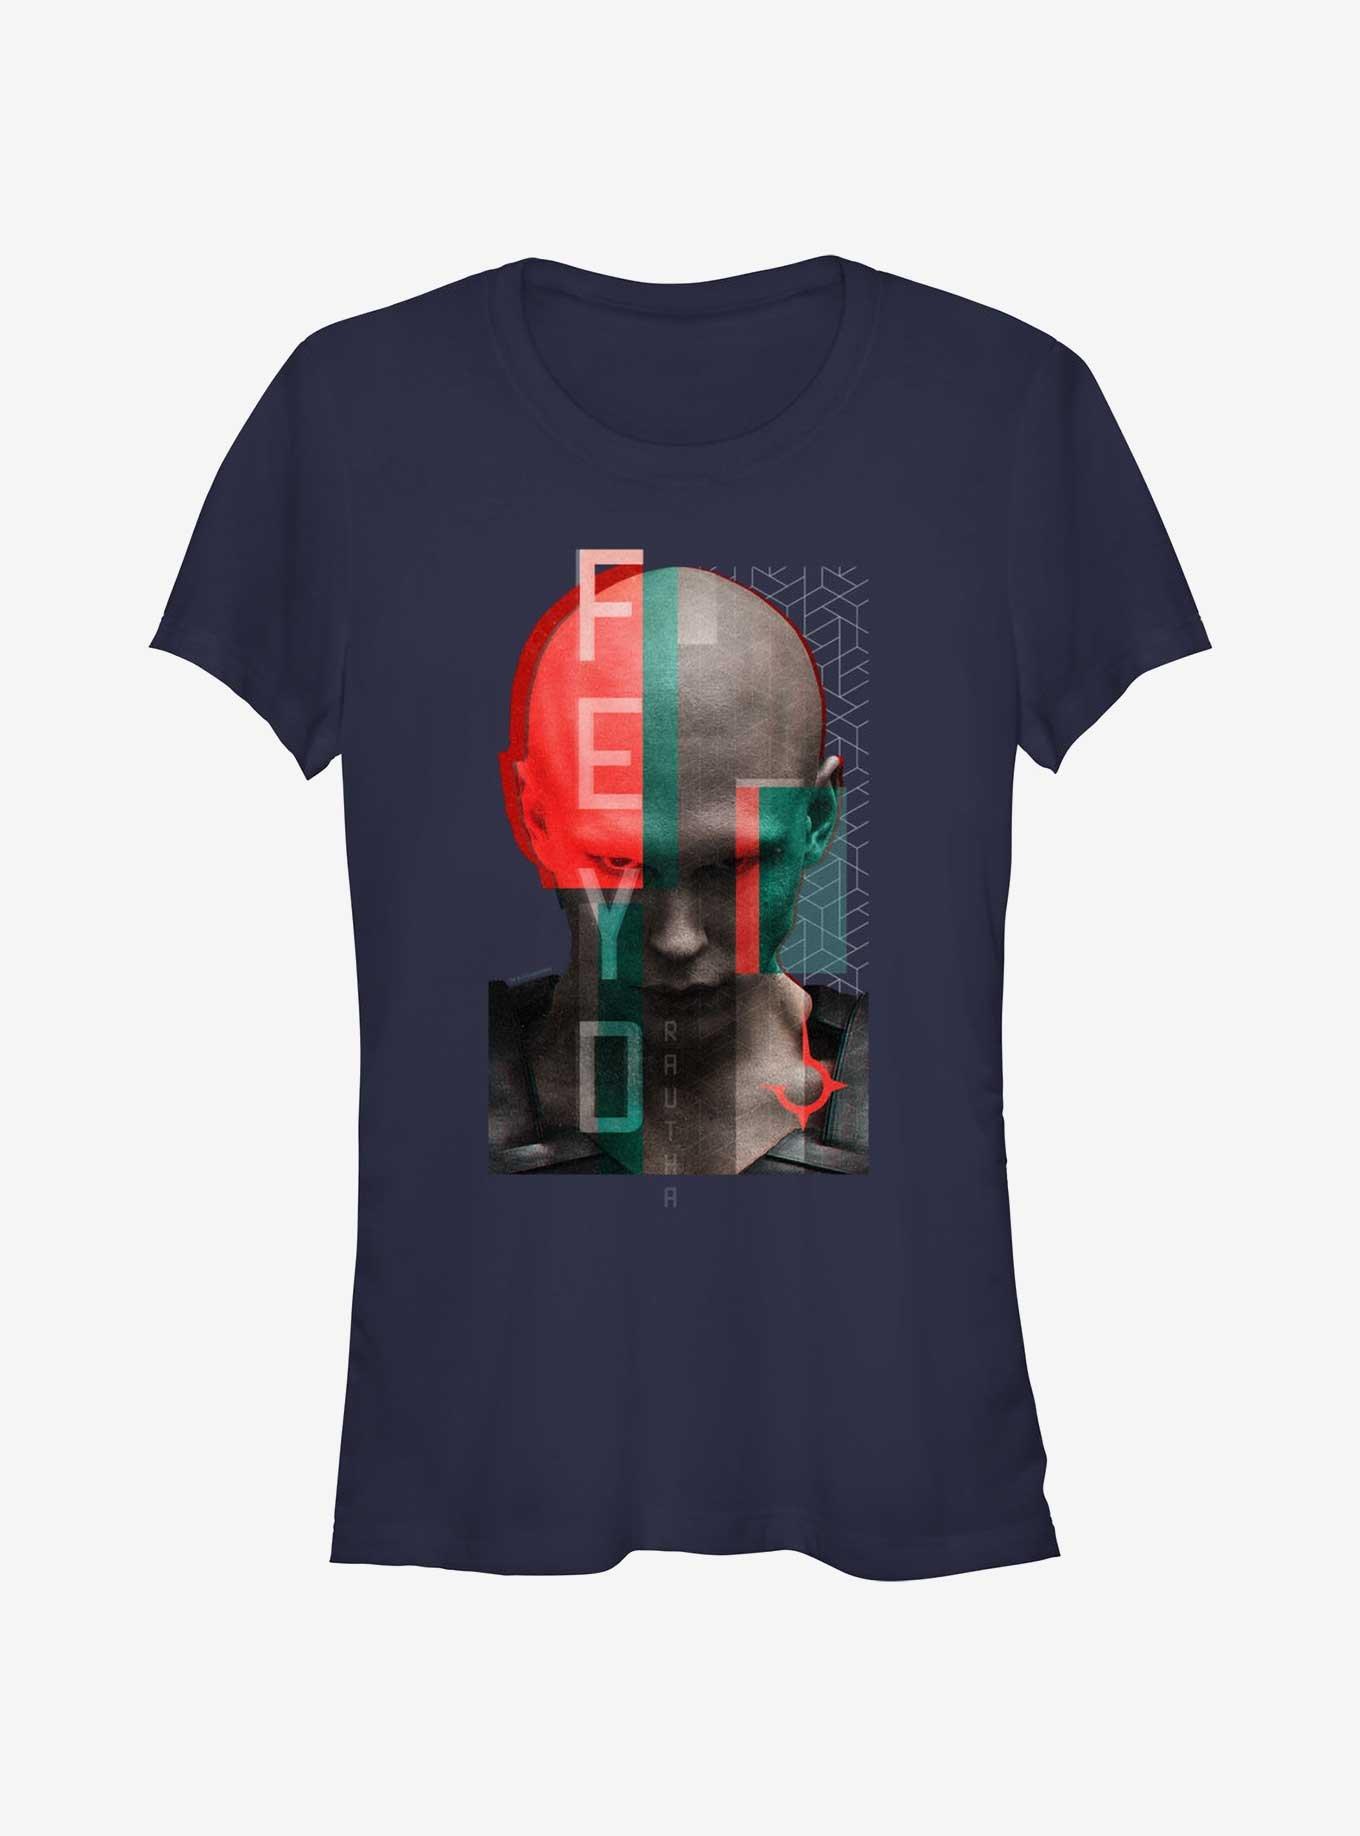 Dune: Part Two Feyd Bust Girls T-Shirt, NAVY, hi-res